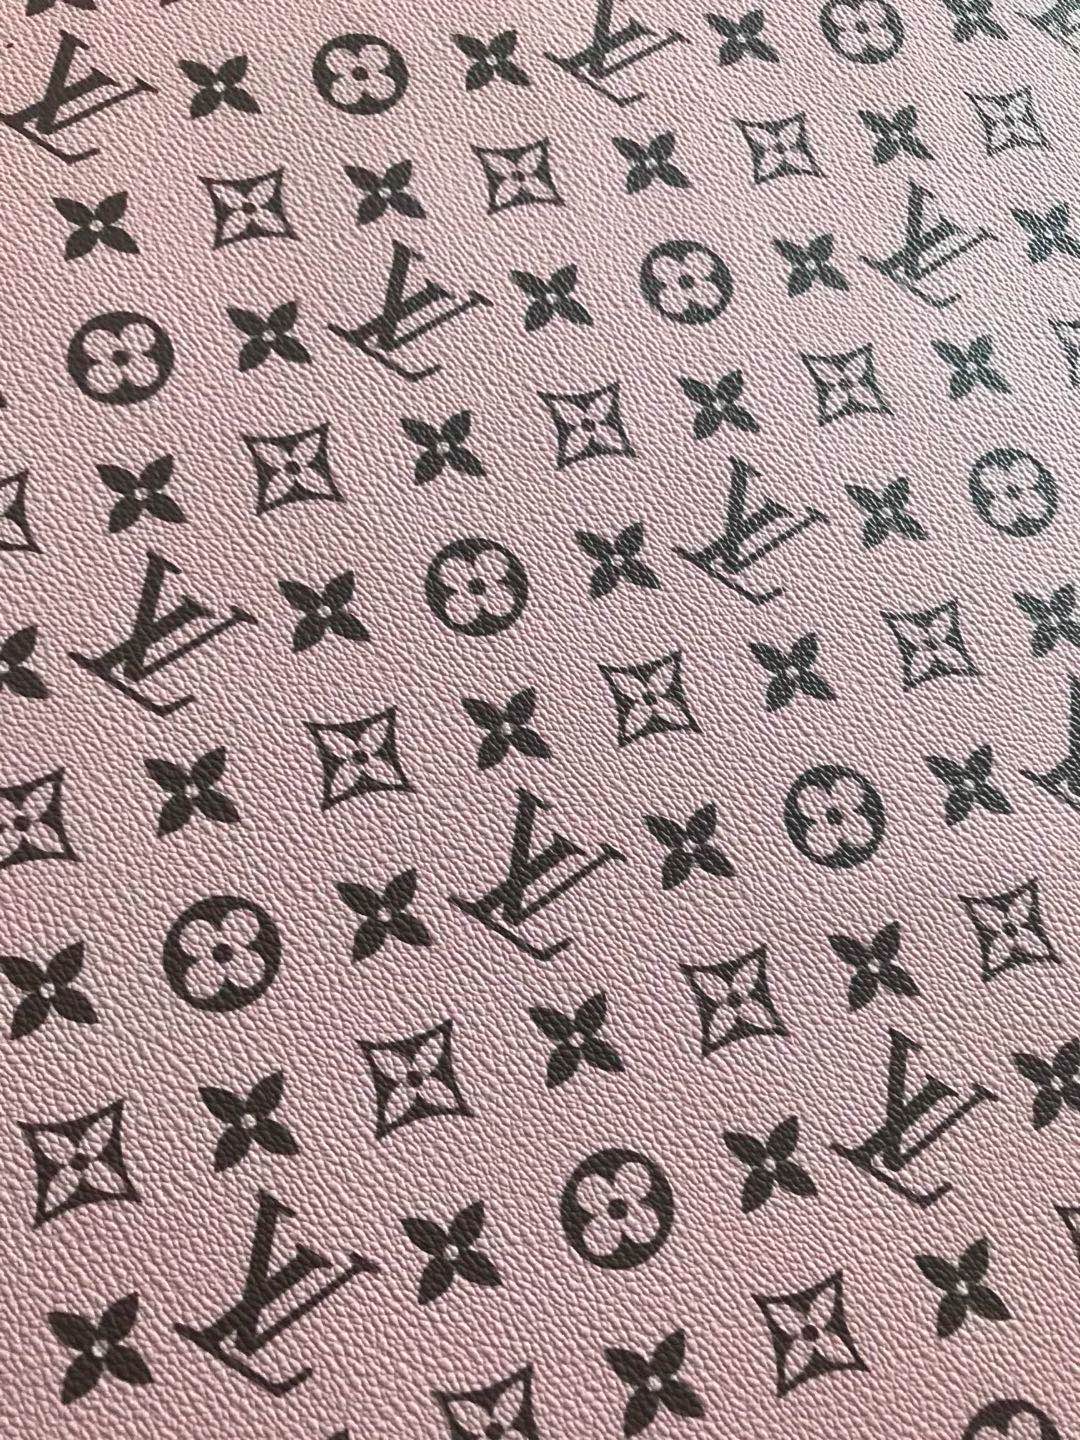 New arrival pink LV leather fabric high quality for bag shoe customs